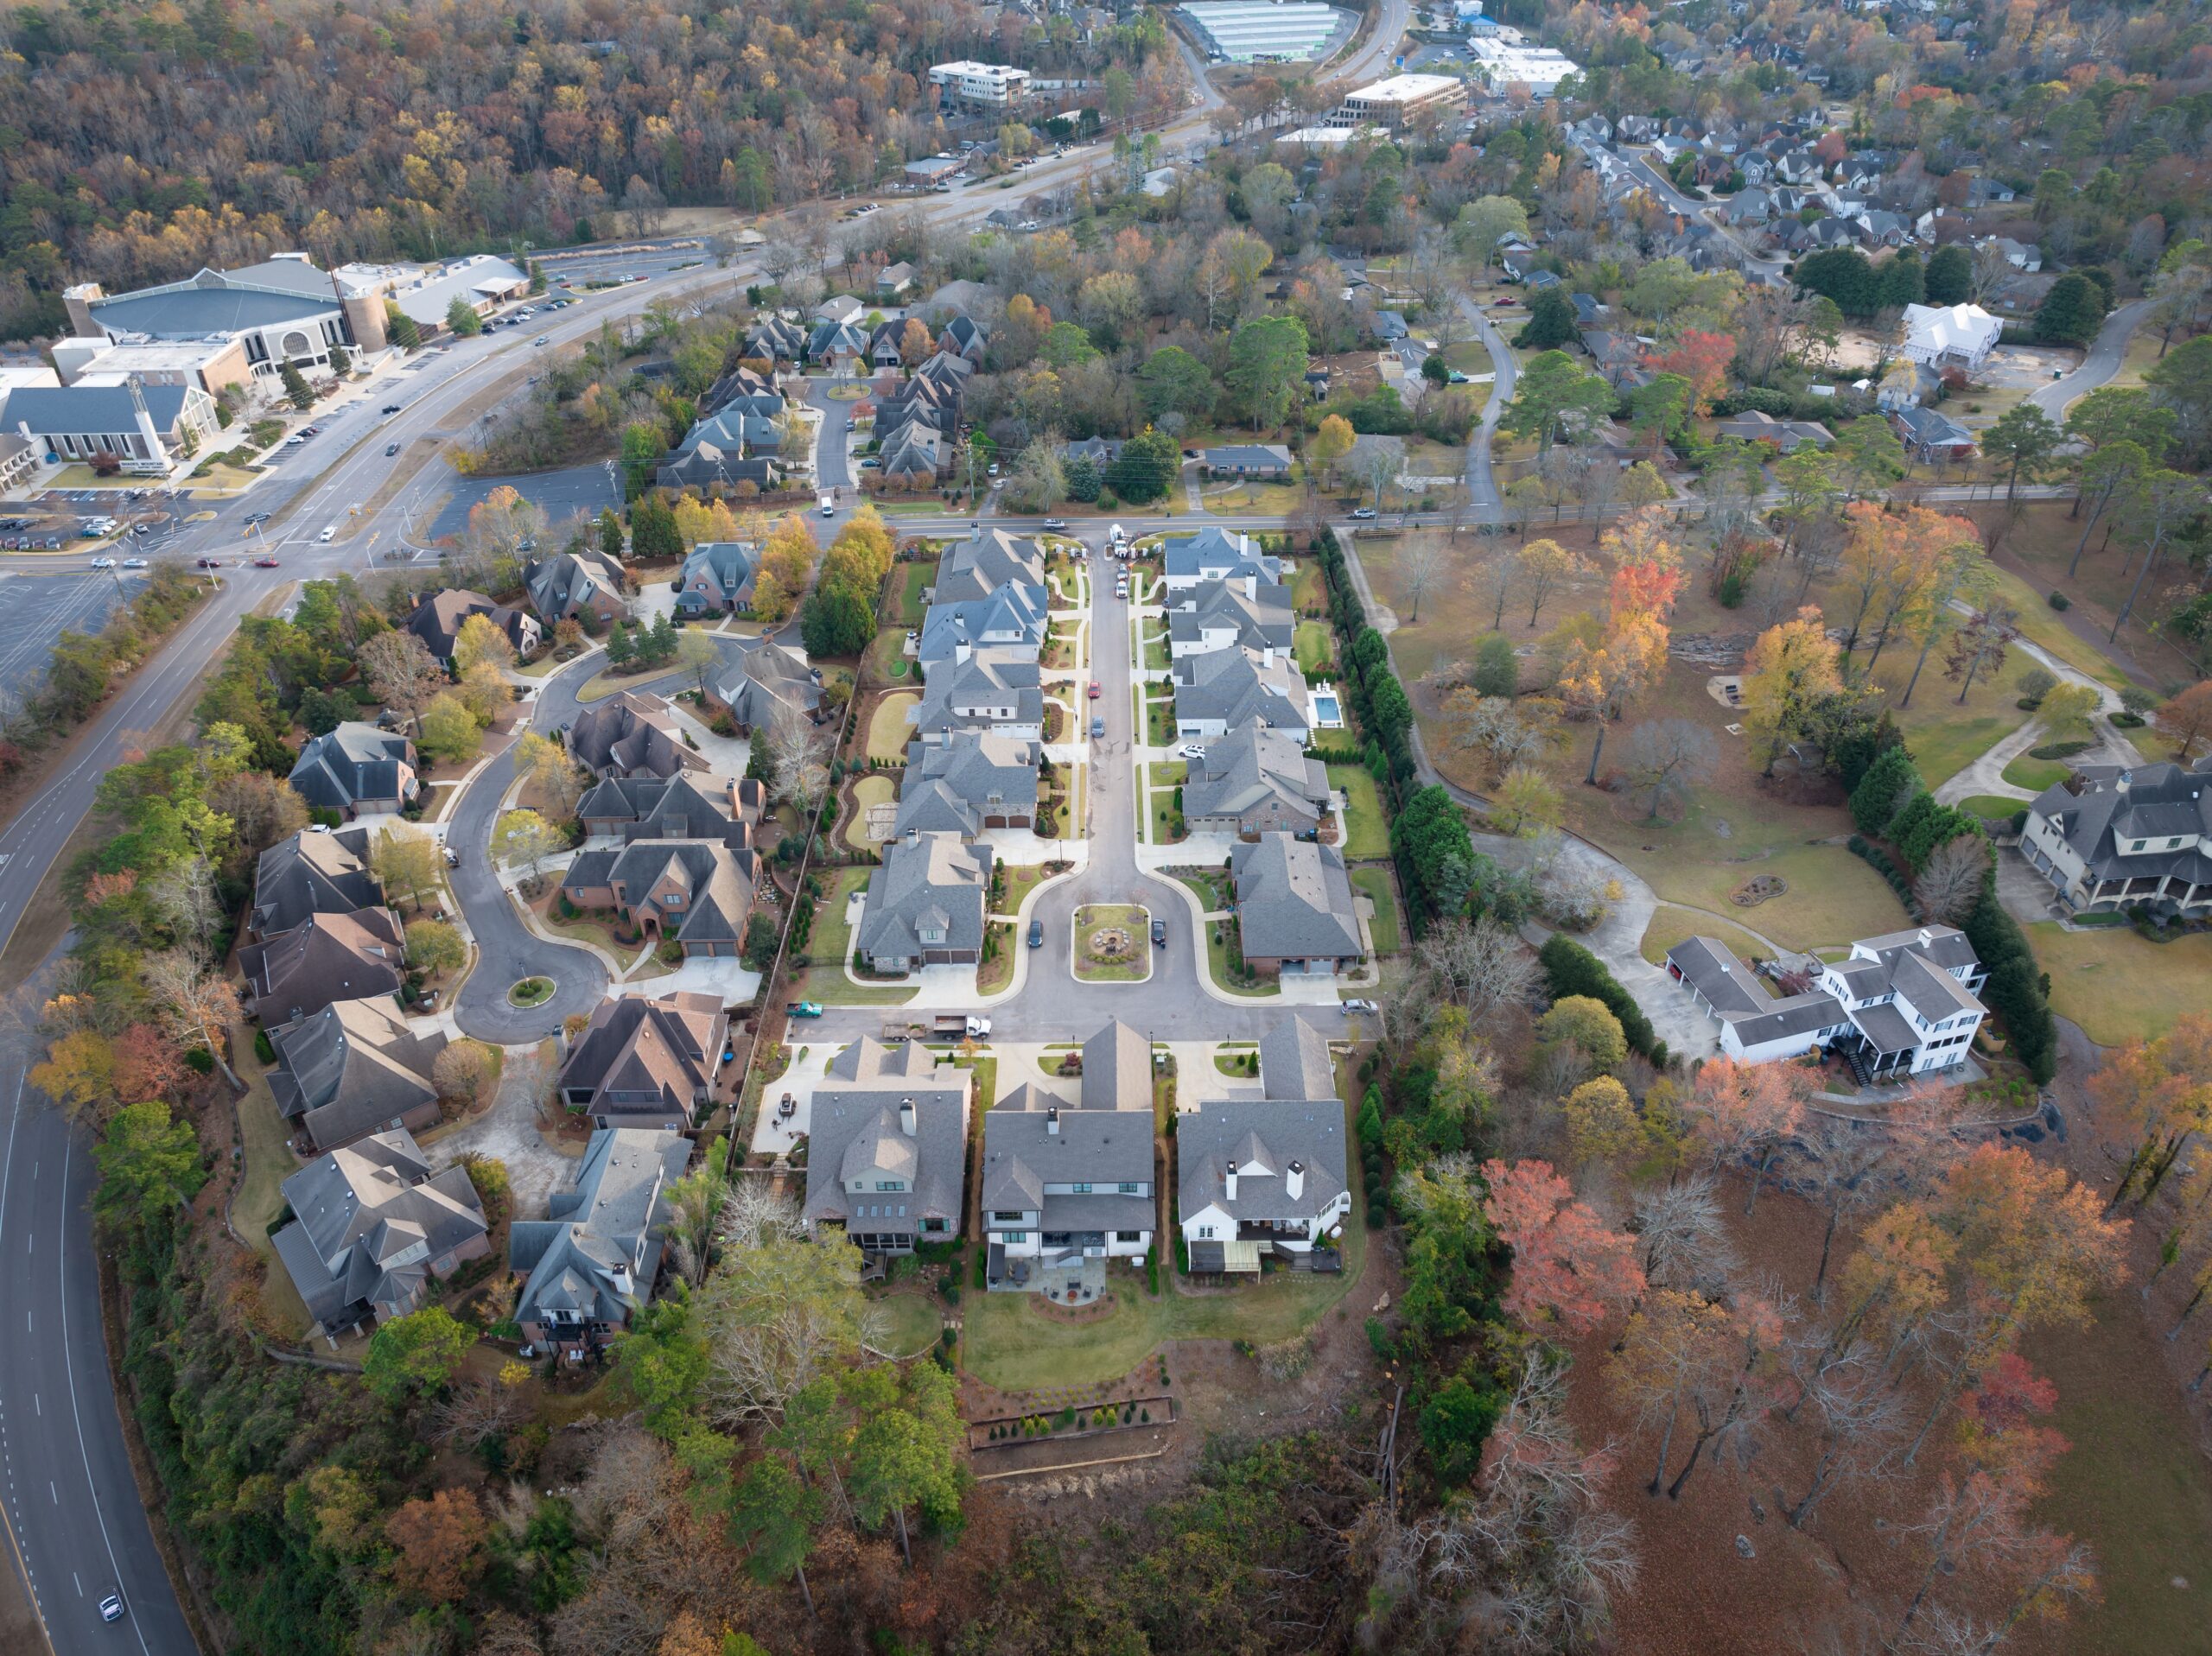 A view of houses from above with trees in the background.